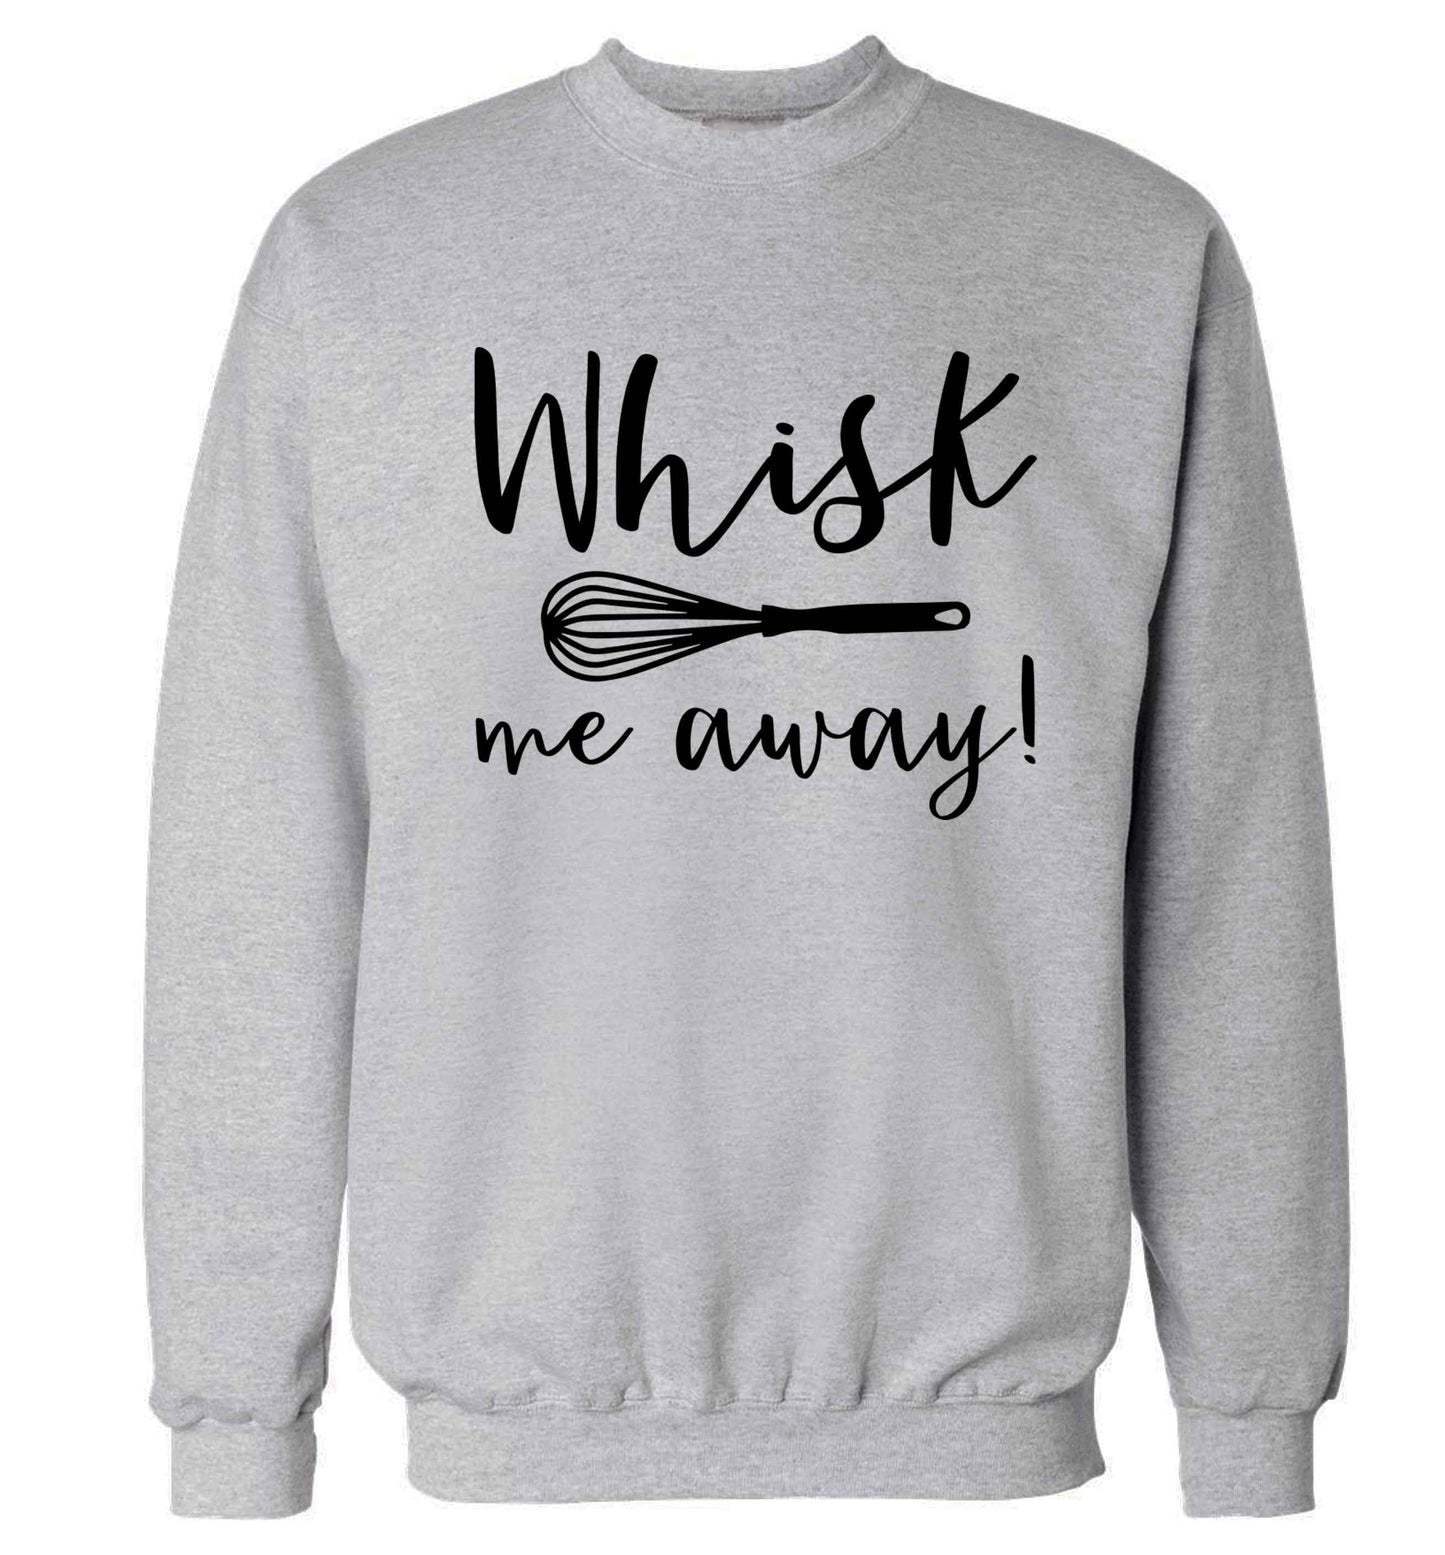 Whisk me away Adult's unisex grey Sweater 2XL